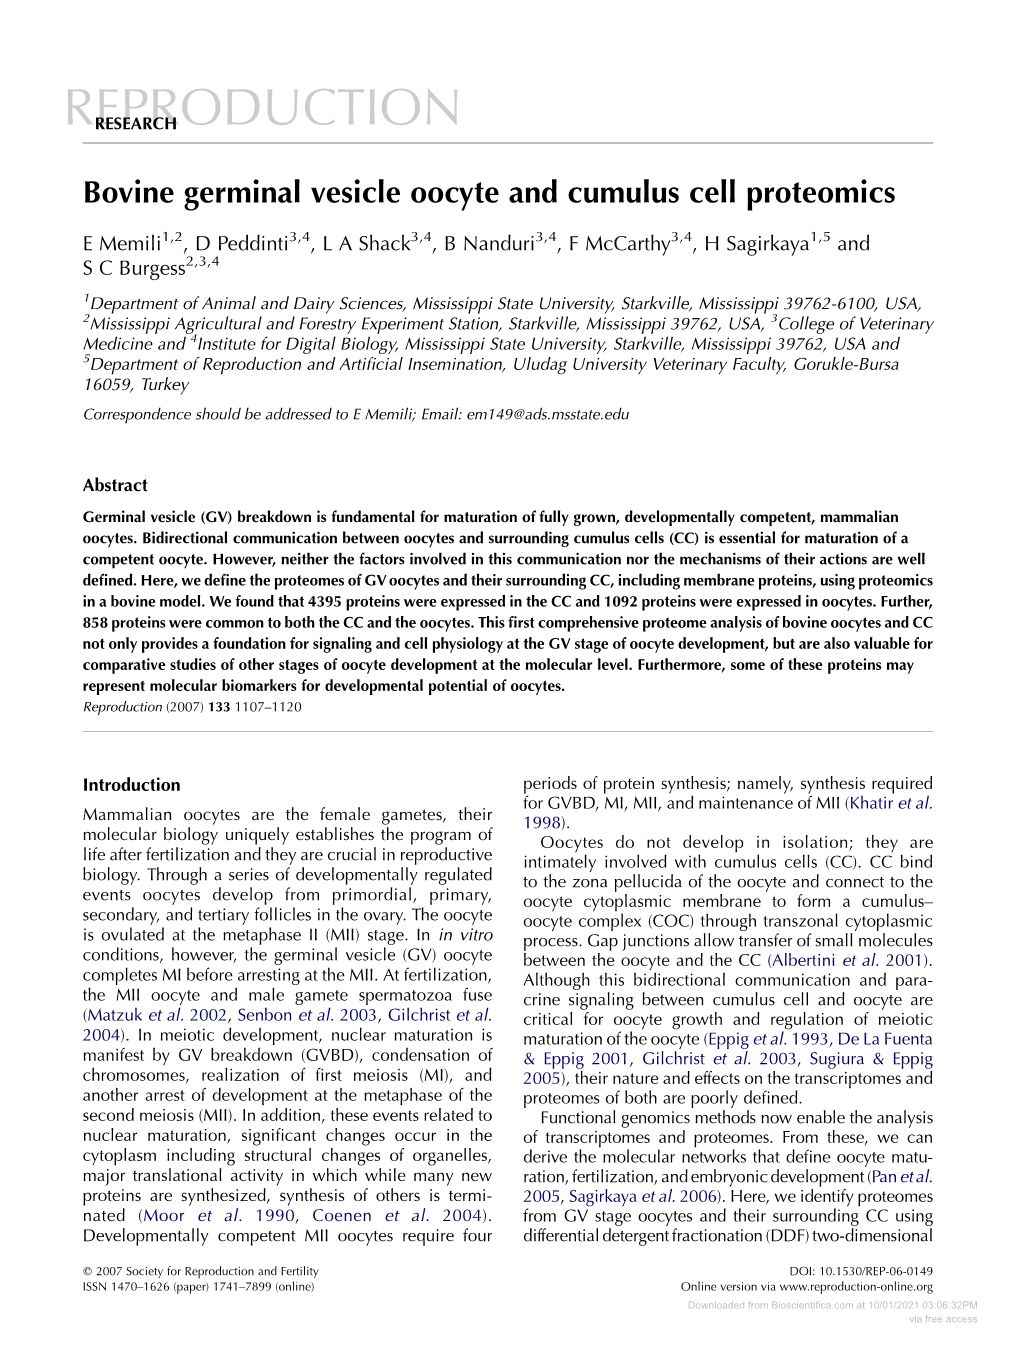 Bovine Germinal Vesicle Oocyte and Cumulus Cell Proteomics